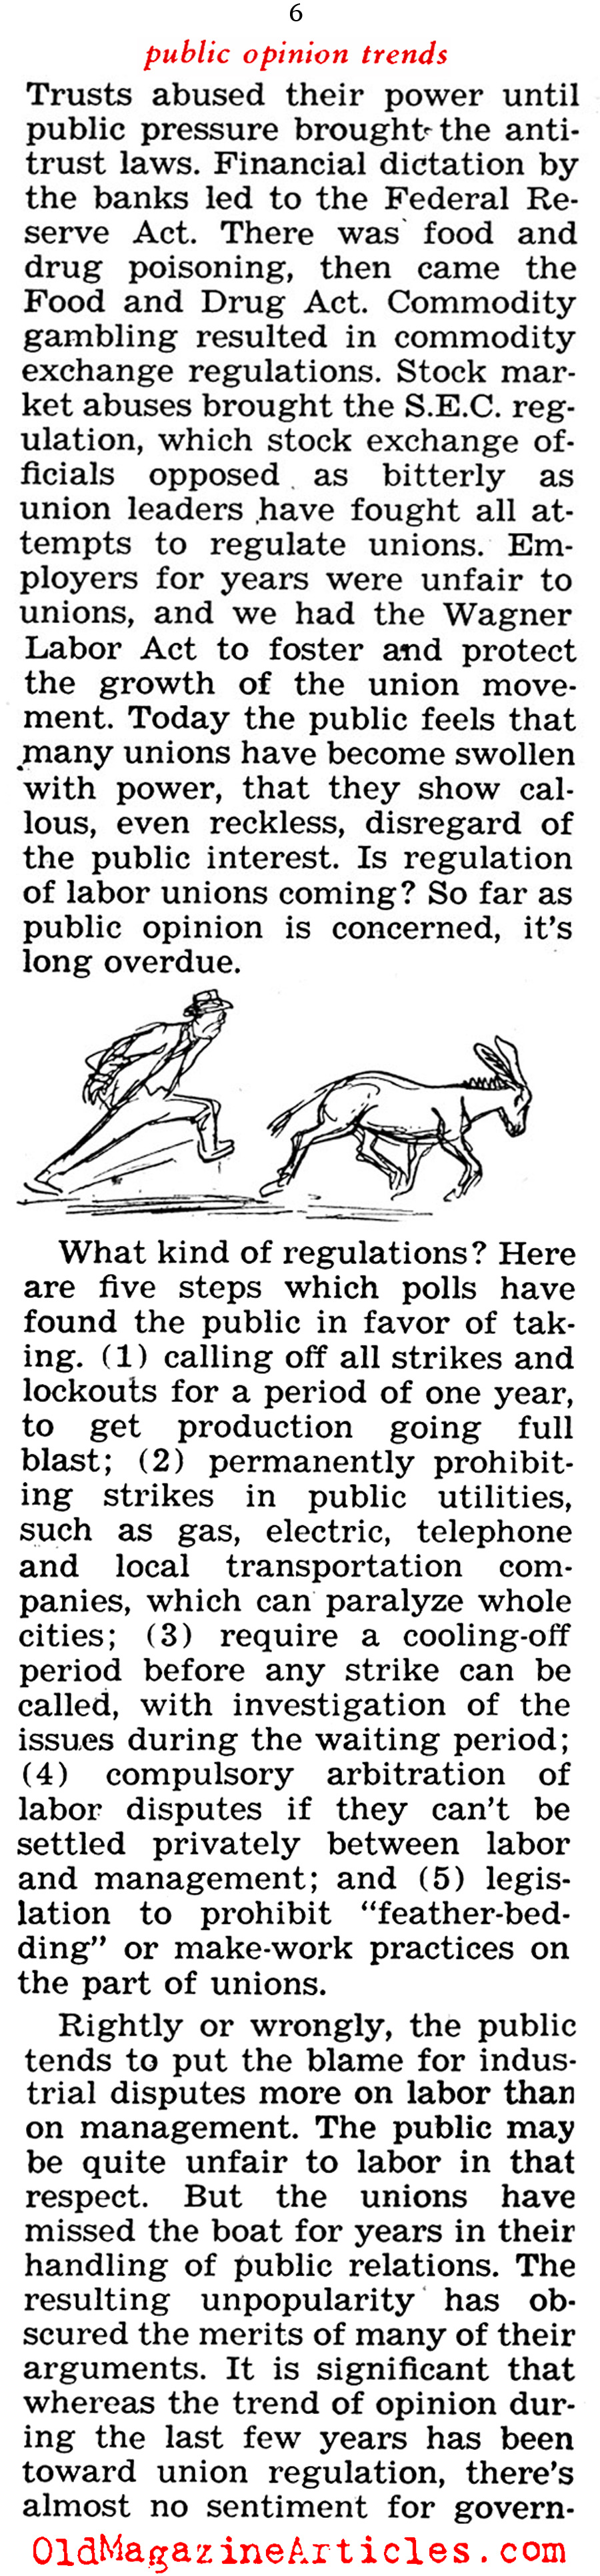 The Cold War and Public Opinion ('47 Magazine, 1947)